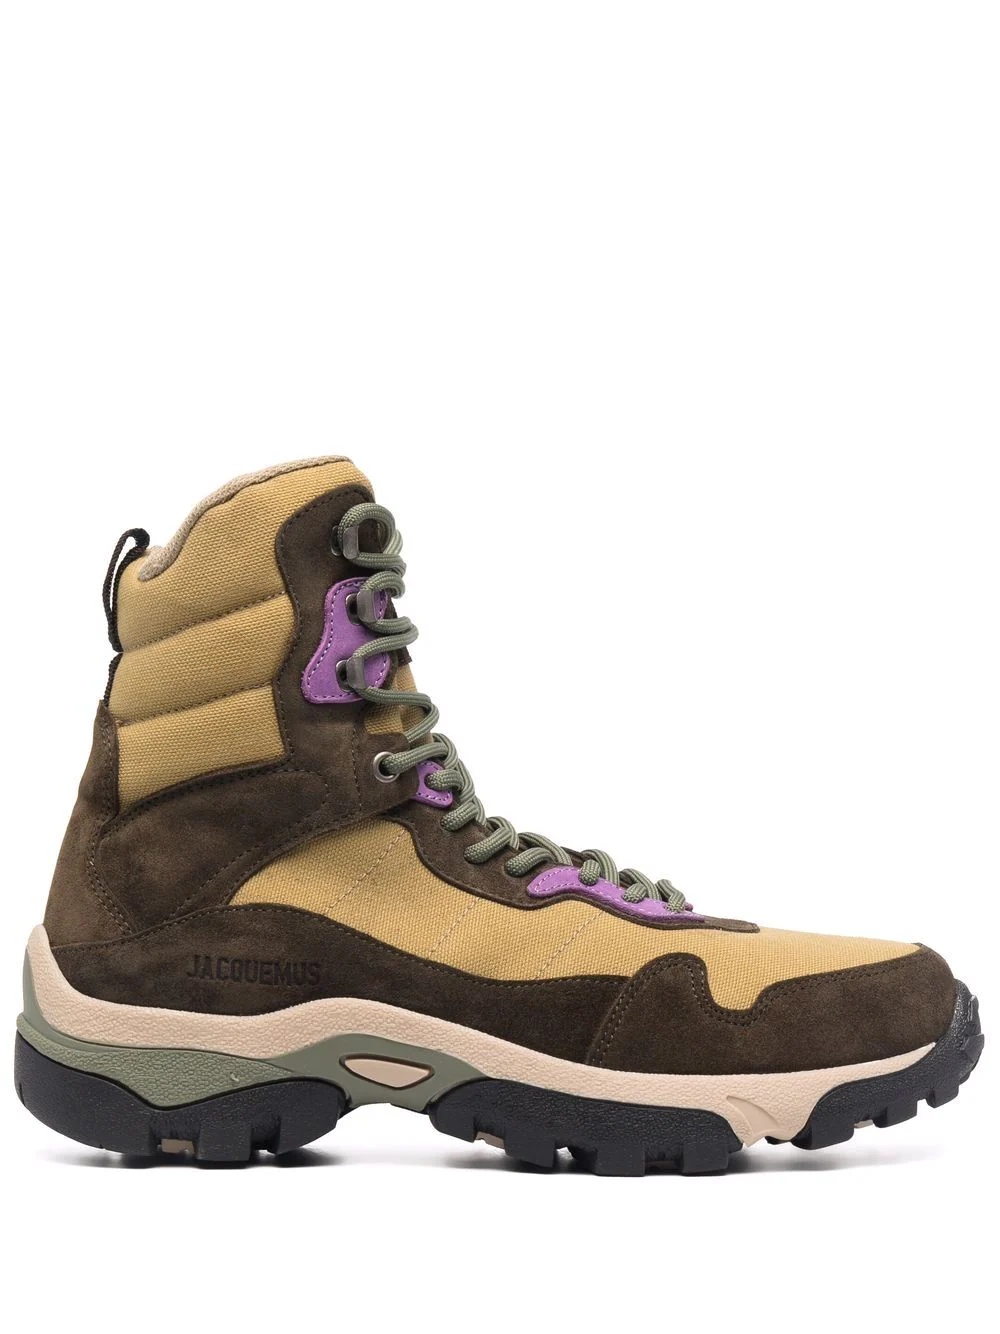 Les Chaussures Terra hiking boots - 1